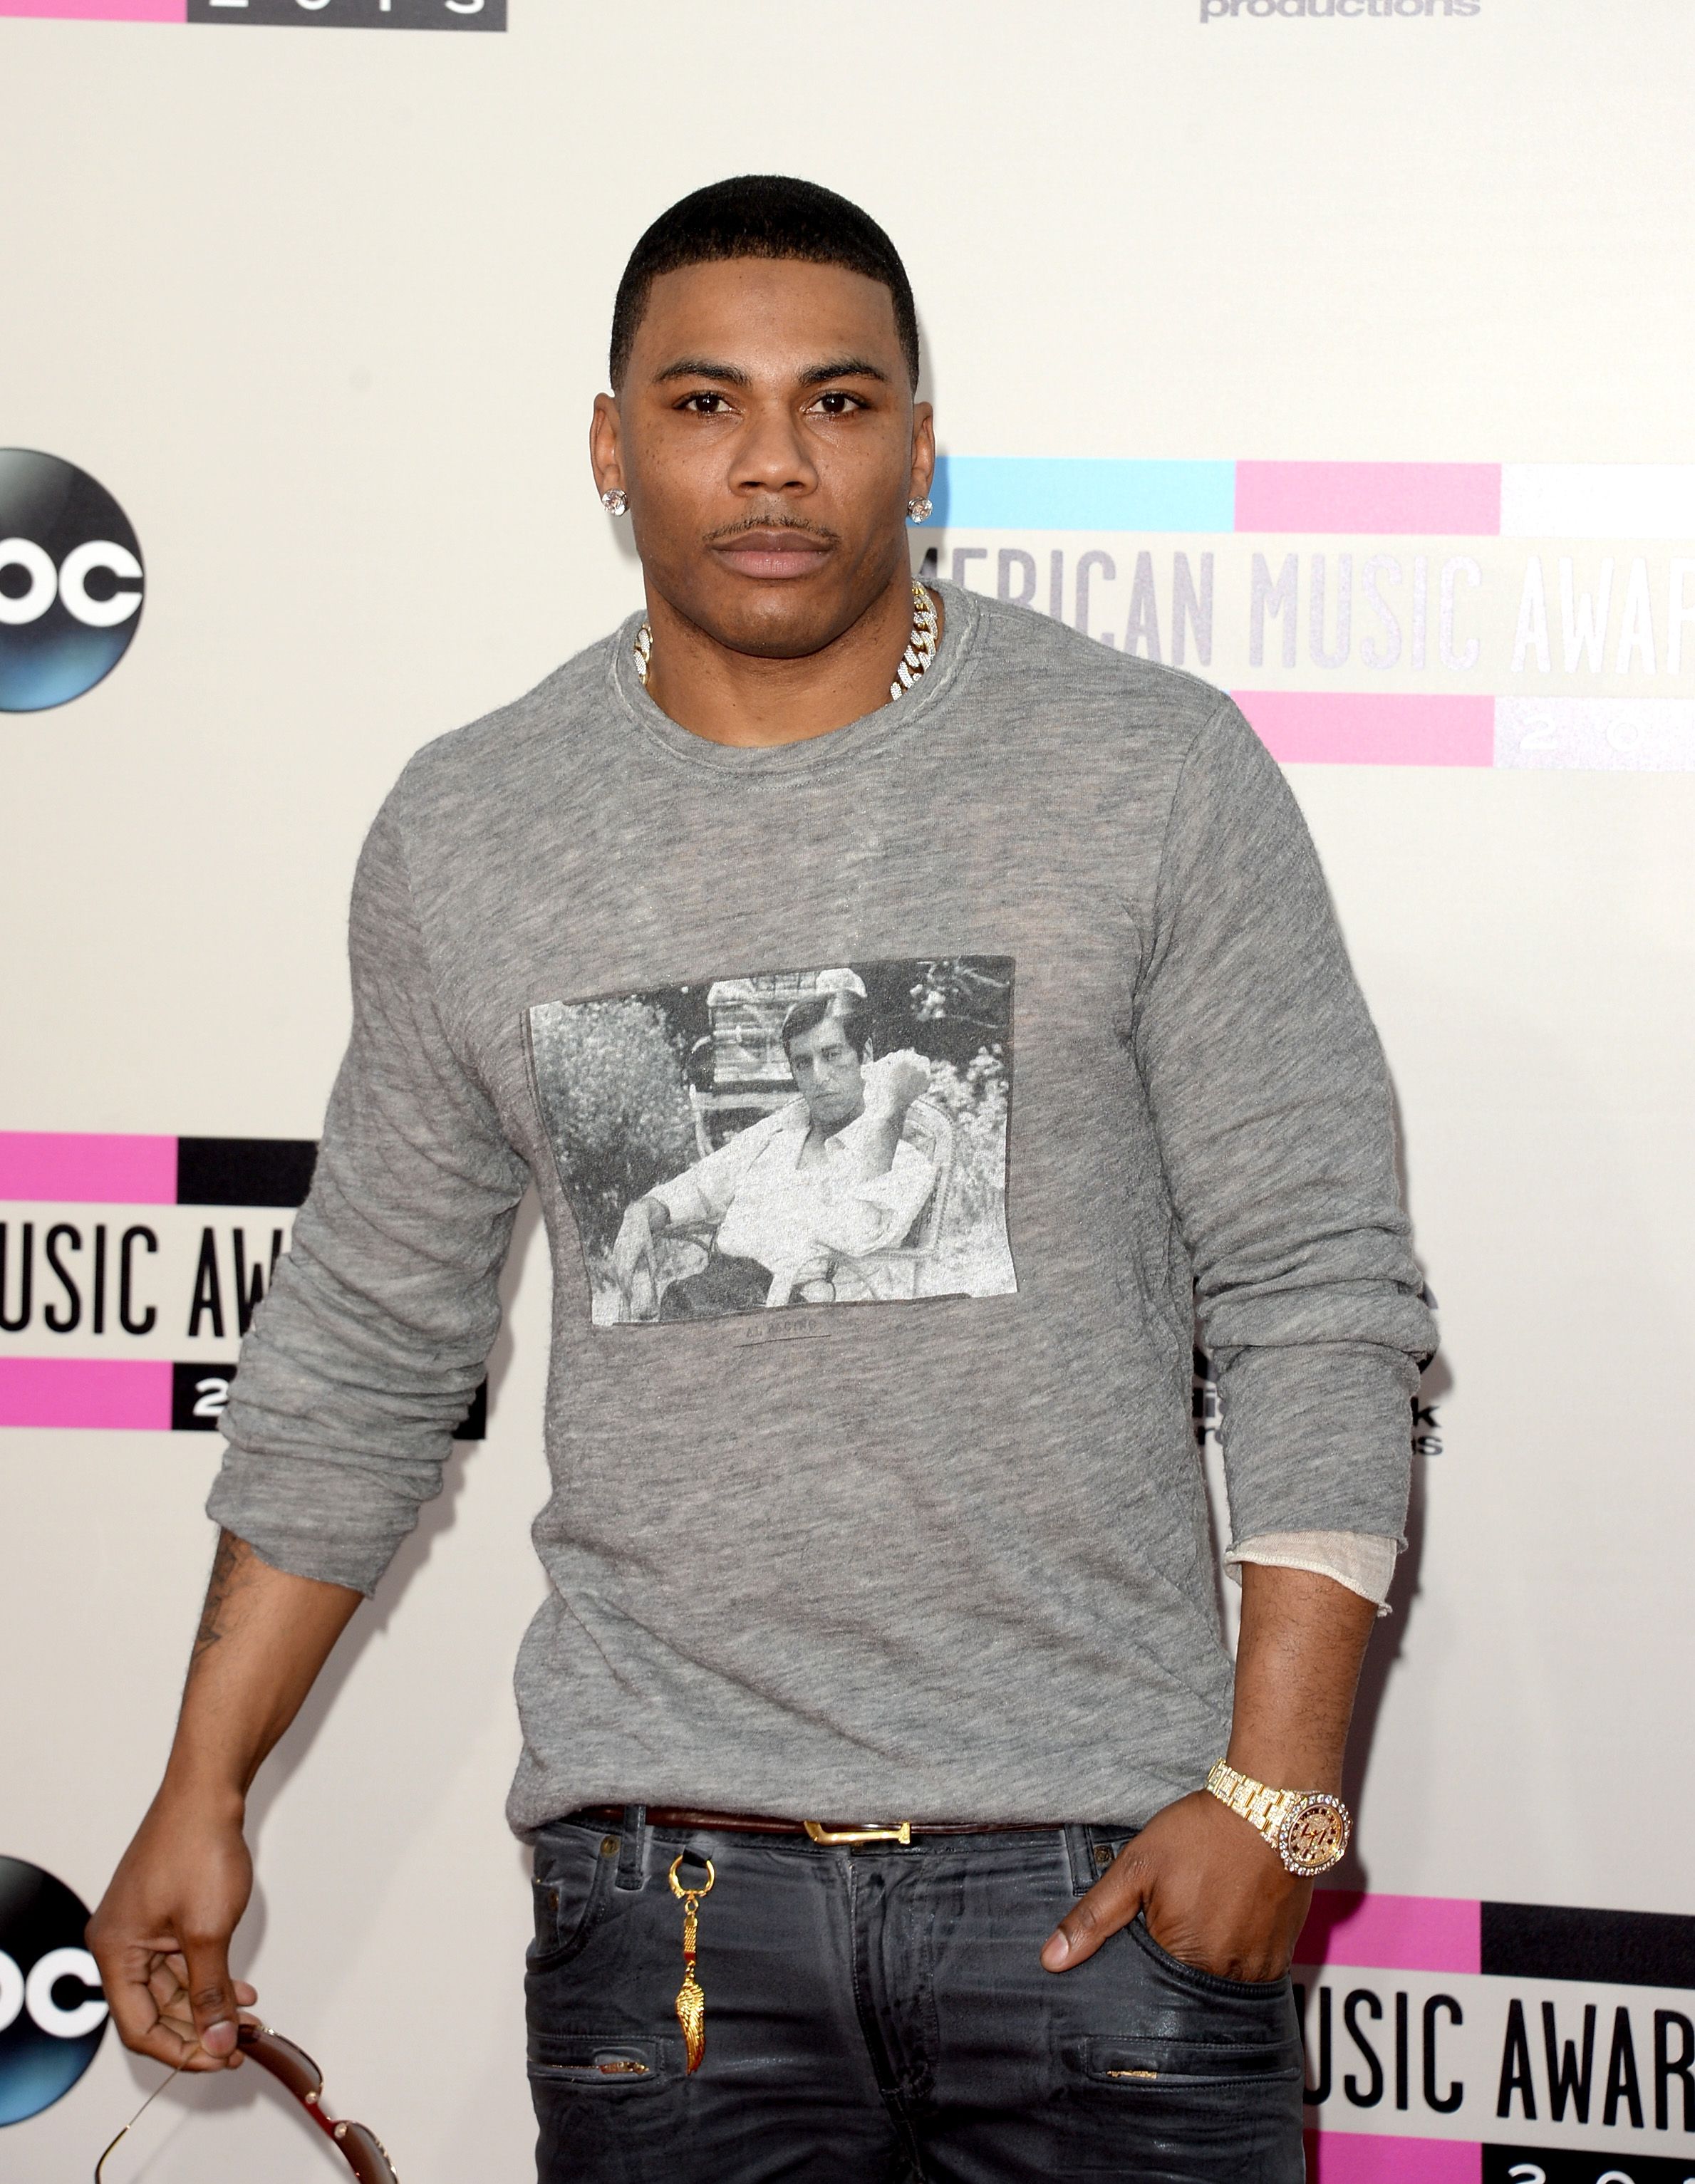 Nelly during the 2013 American Music Awards at Nokia Theatre L.A. Live on November 24, 2013. | Photo: Getty Images